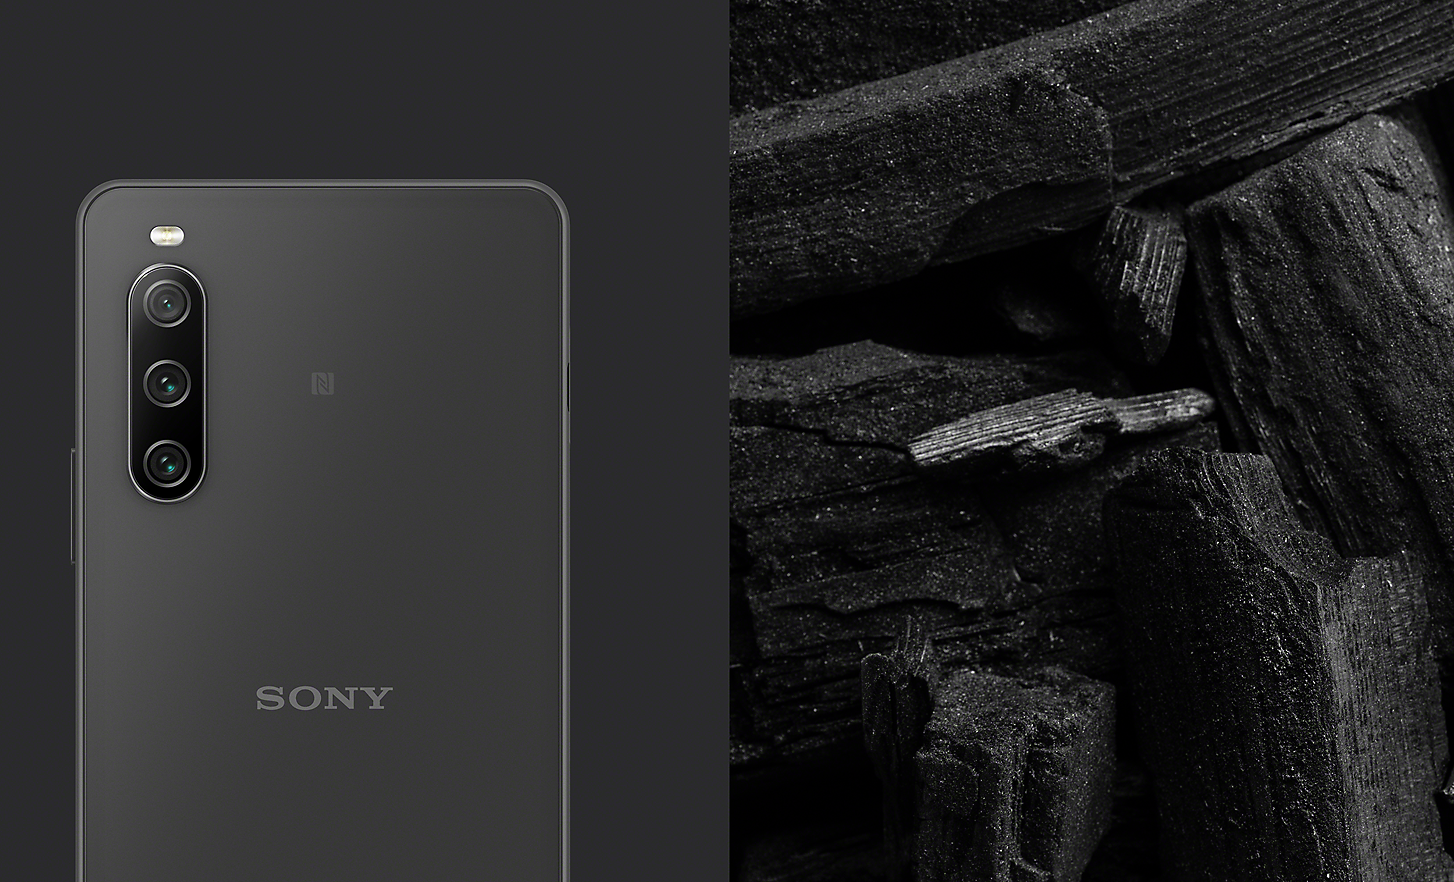 The Xperia 10 IV in black alongside an image of black charcoal